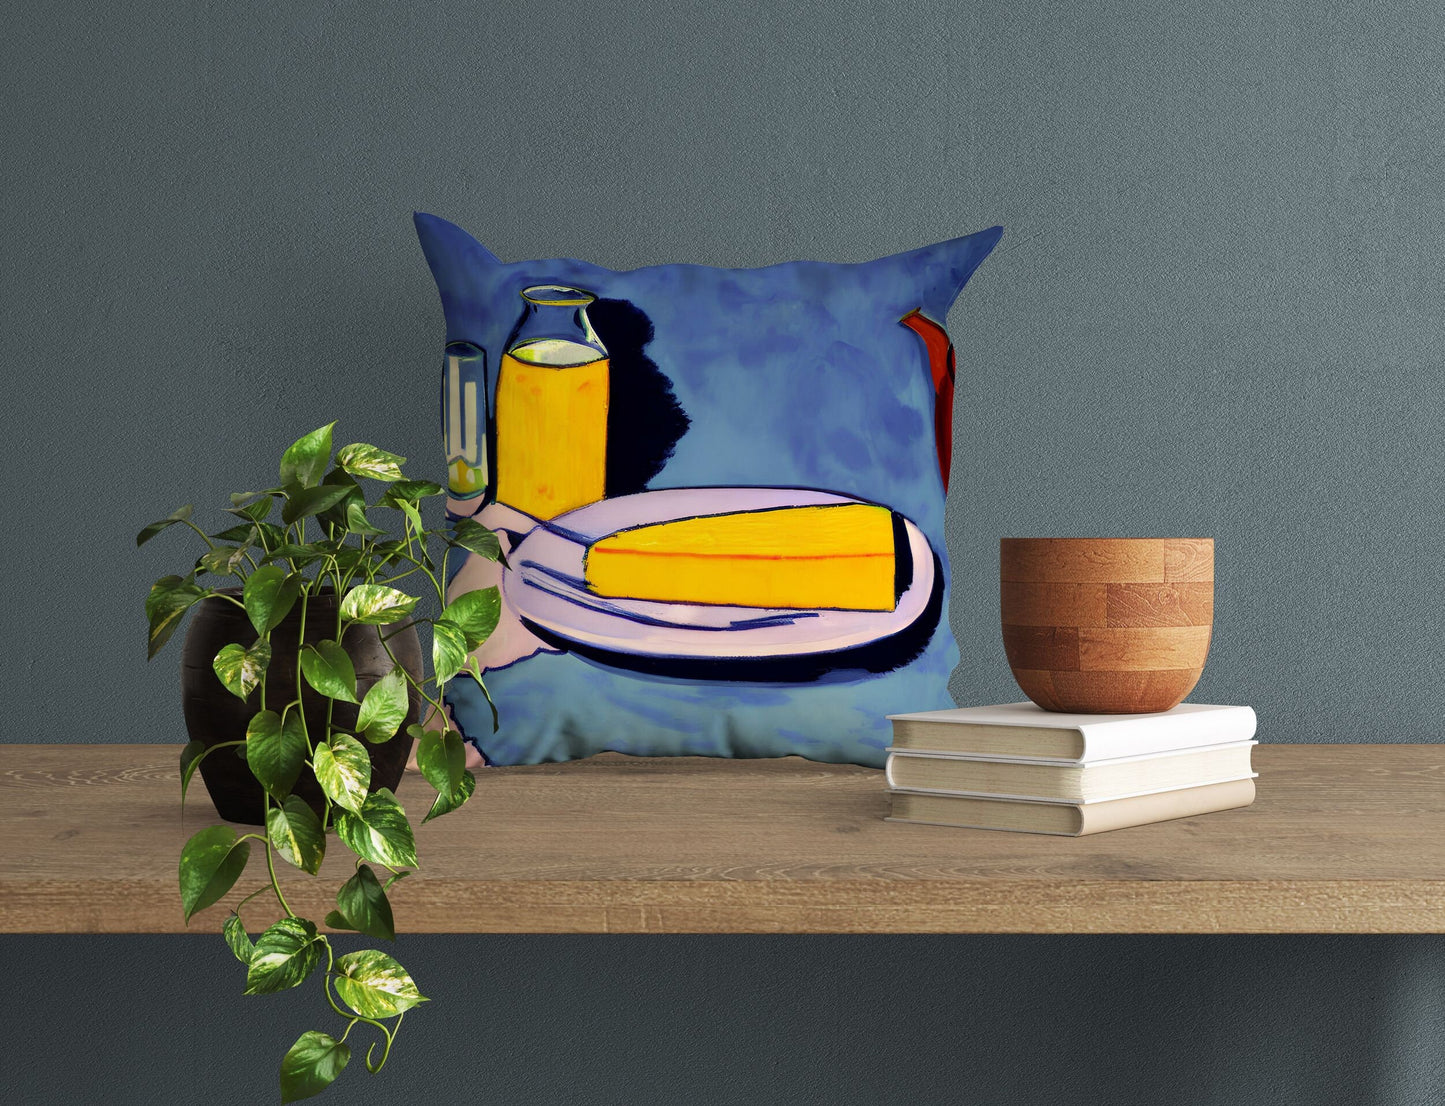 Bread And Drink, Tapestry Pillows, Abstract Pillow, Artist Pillow, Colorful Pillow Case, Modern Pillow, Square Pillow, Pillow Cases Kids